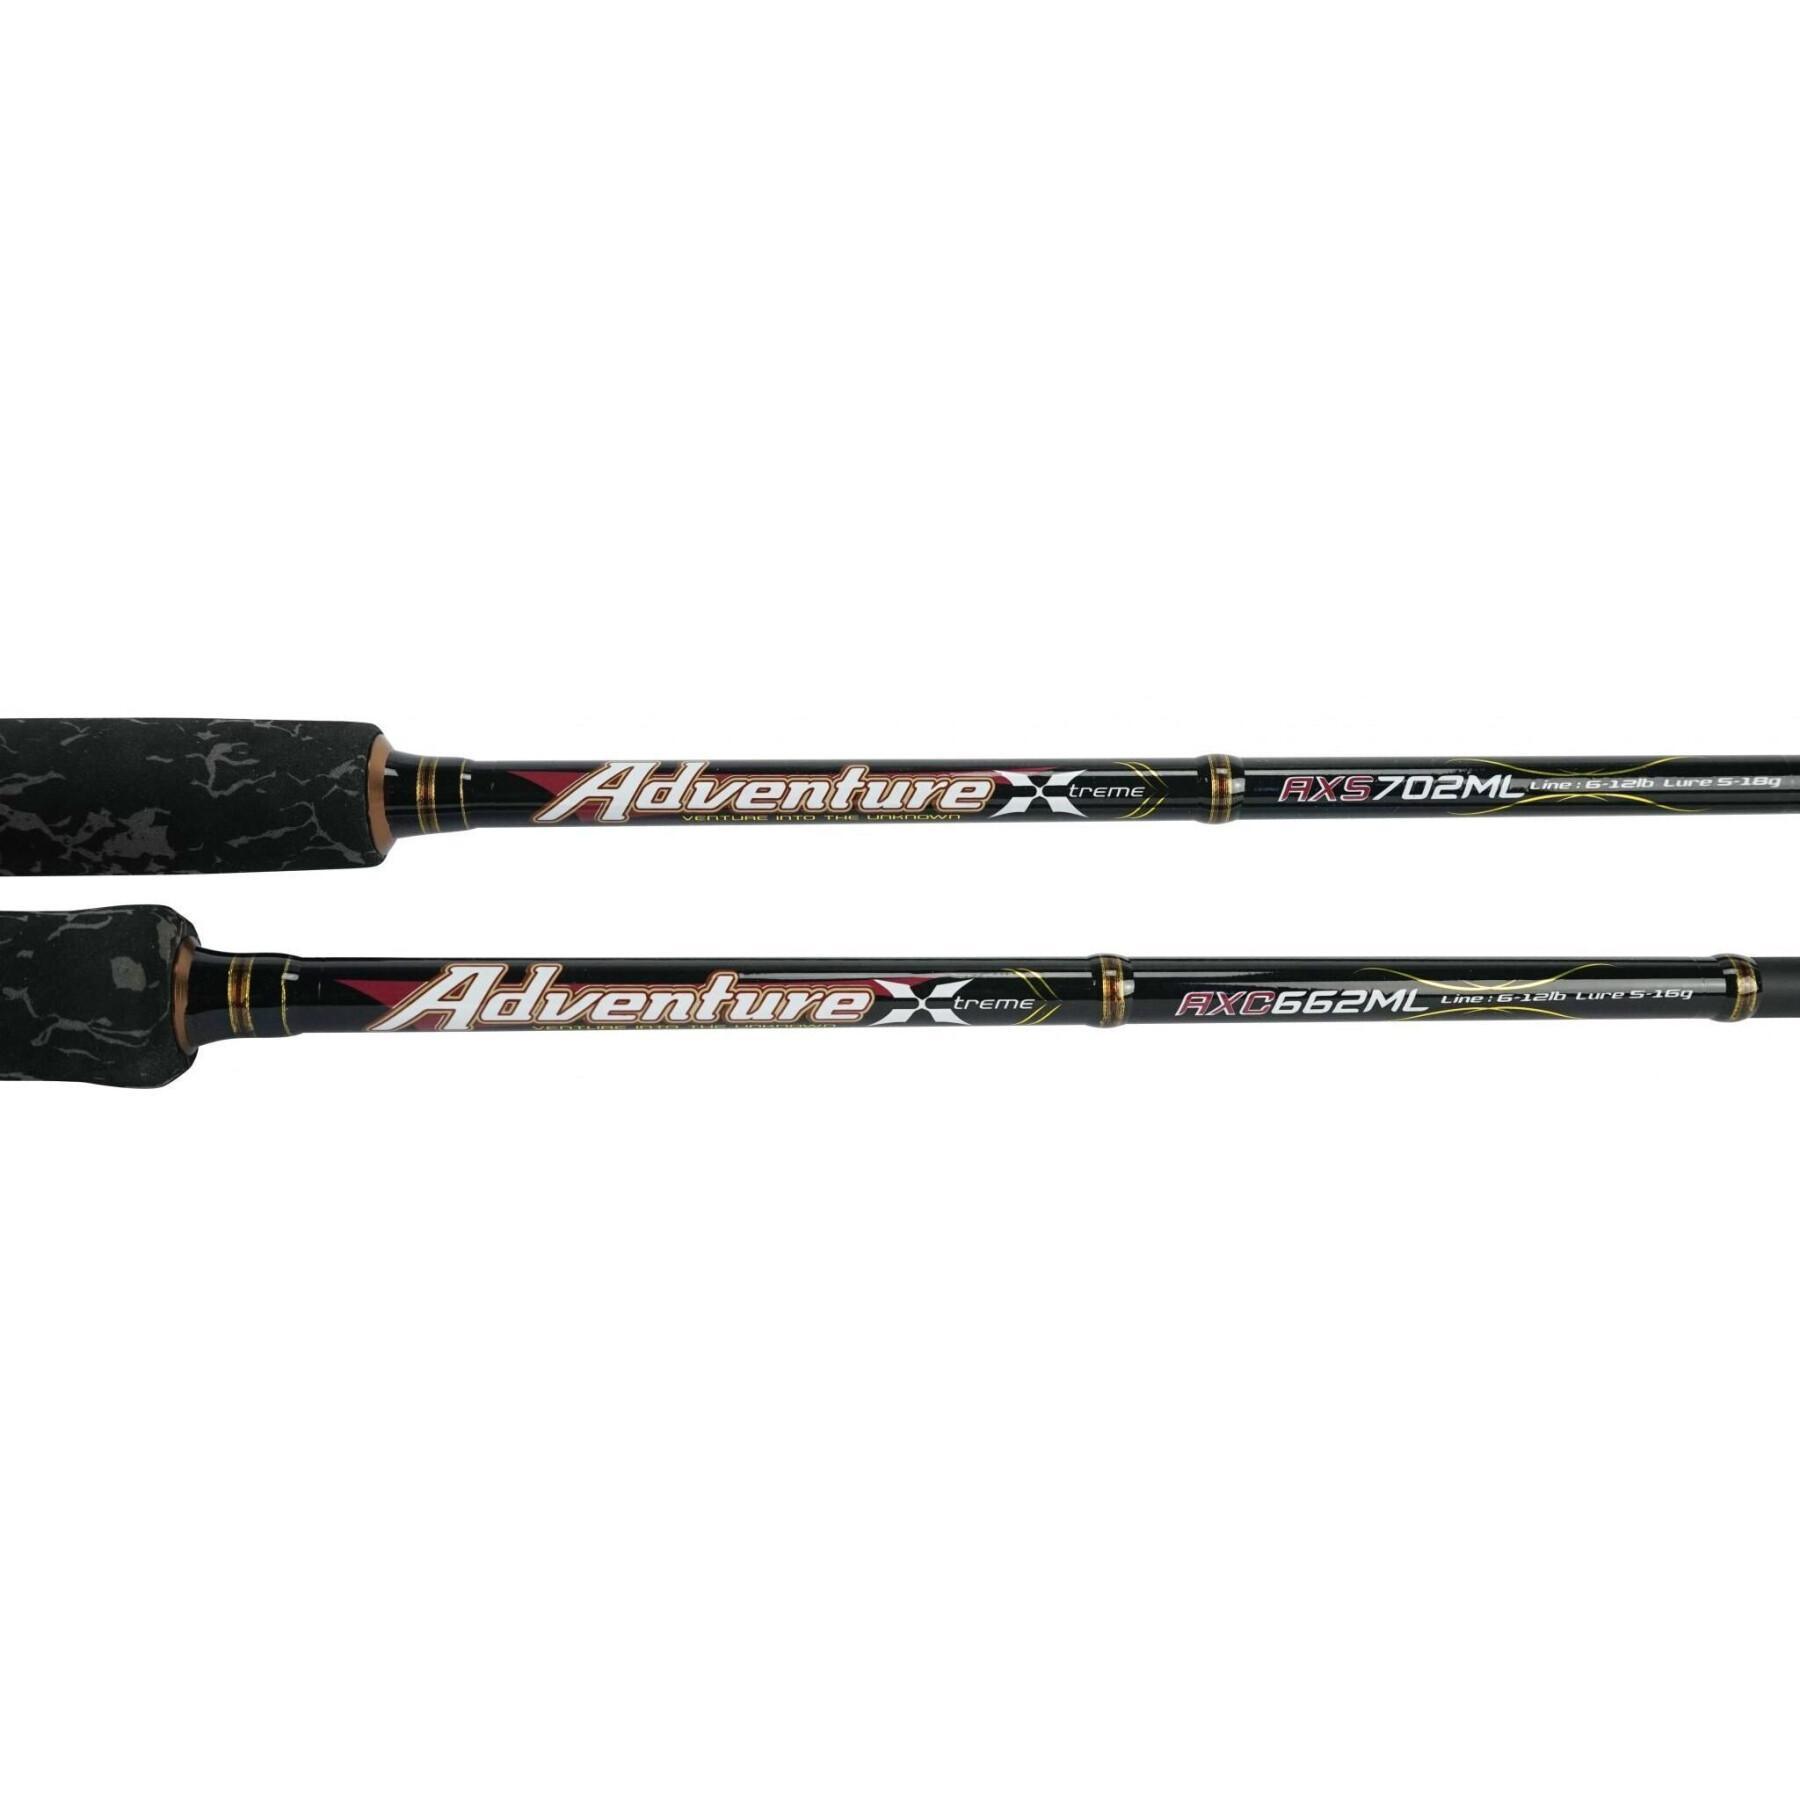 Cana casting Storm Adventure Xtreme 4-10lbs